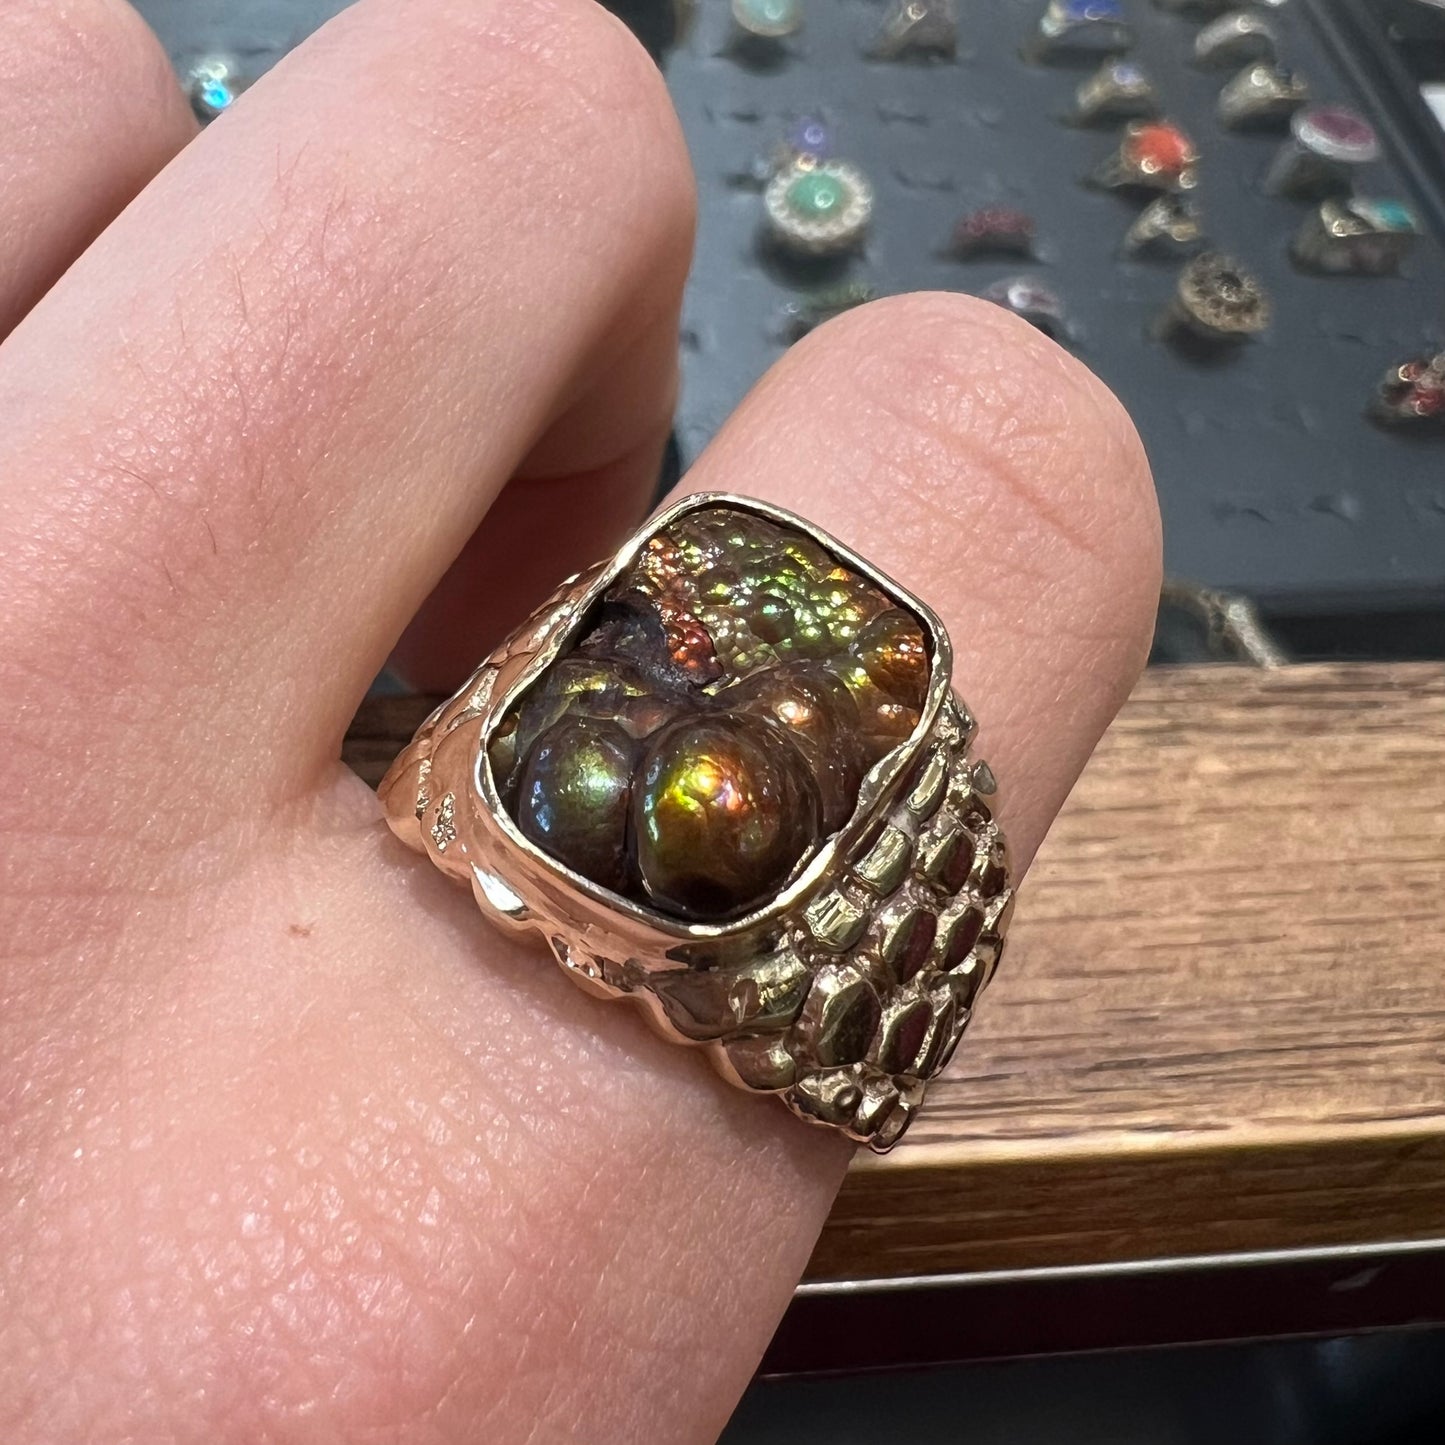 A men's yellow gold, nugget style ring set with a bubbly, California fire agate stone.